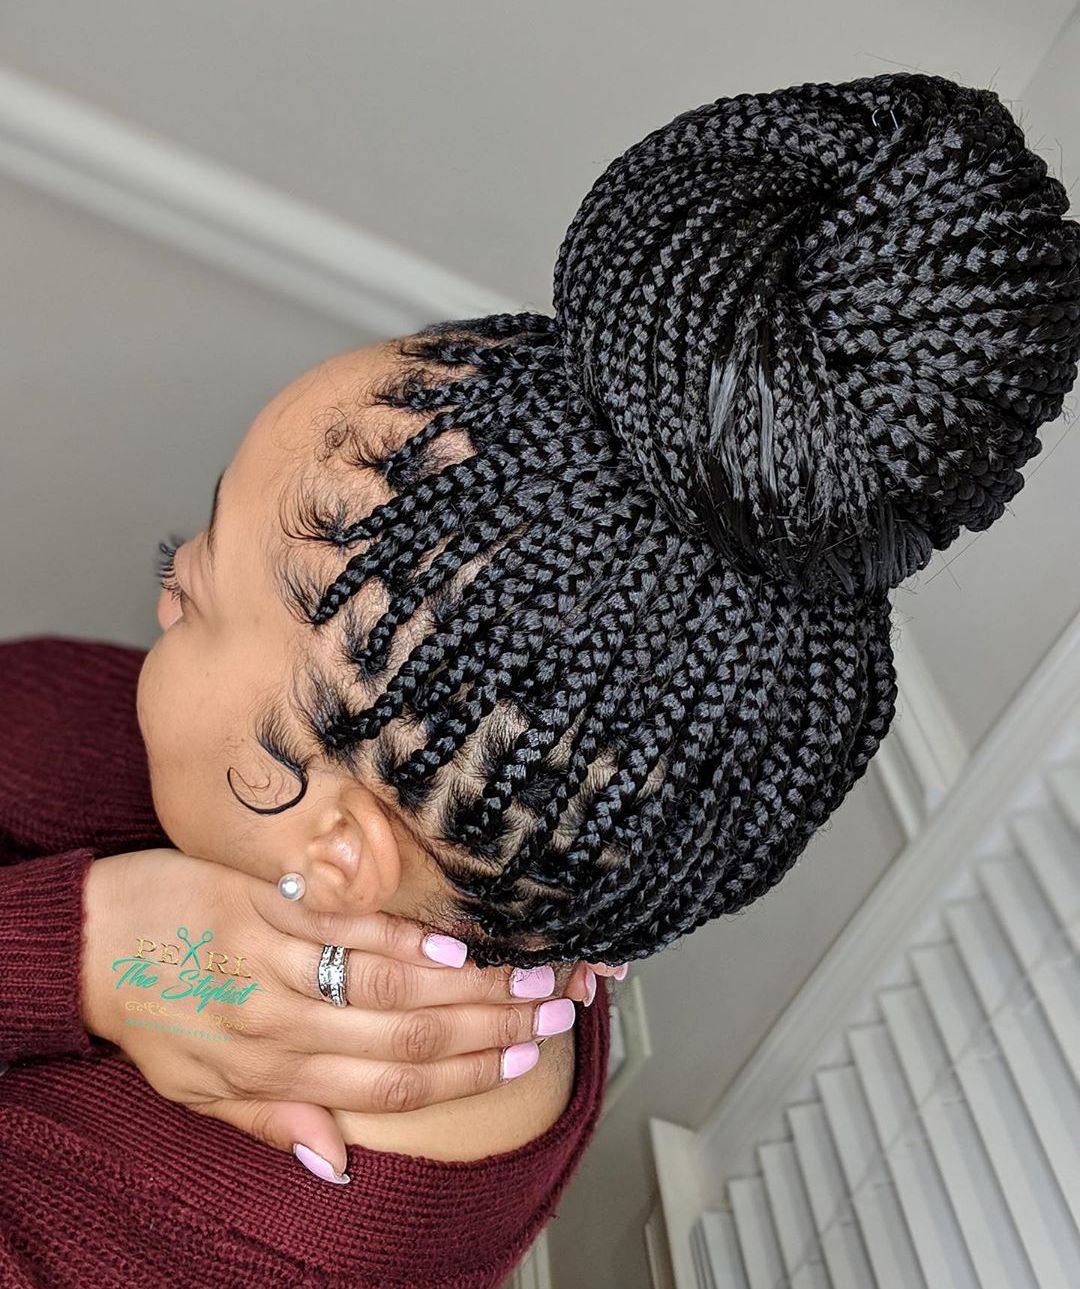 47 Gorgeous Black Braided Hairstyles That Will Inspire Your Next Look